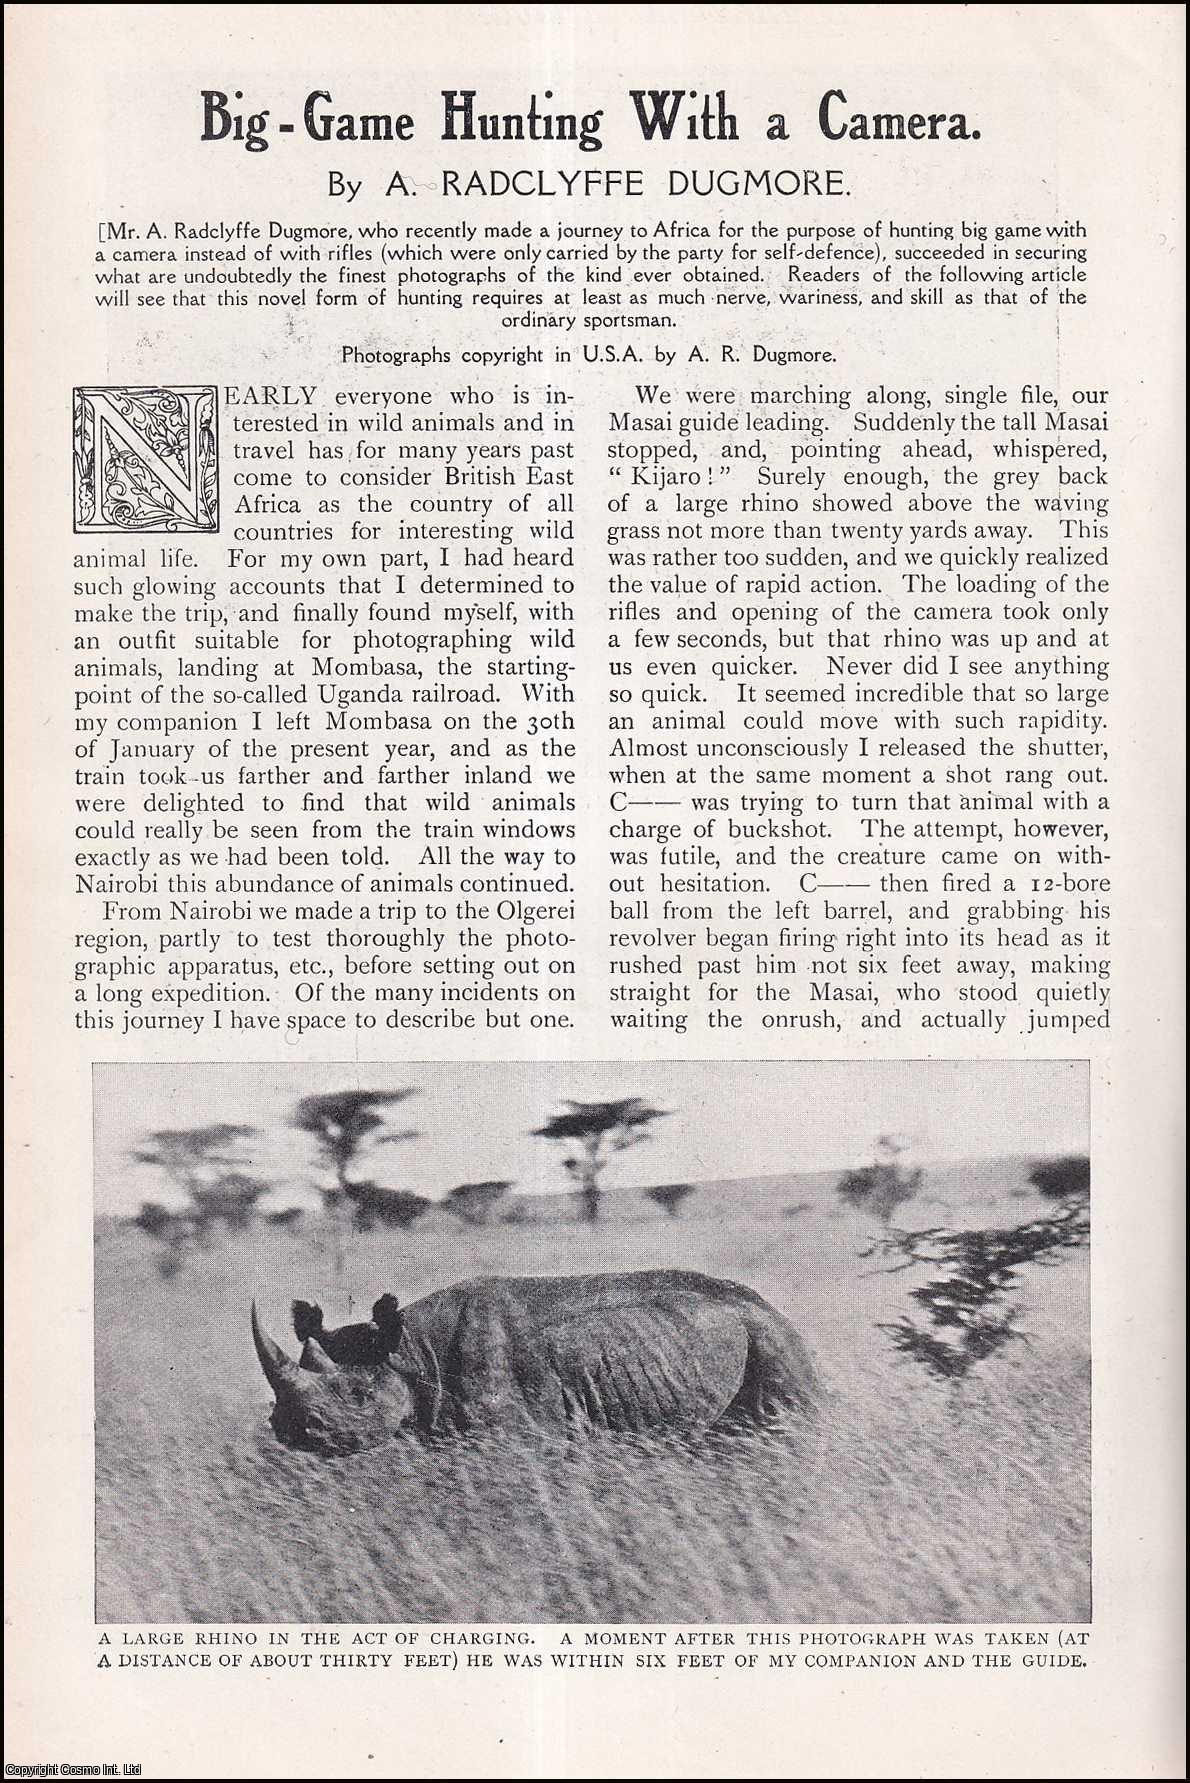 A. Radclyffe Dugmore - Big-Game Hunting in Africa with a Camera. An uncommon original article from The Strand Magazine, 1909.